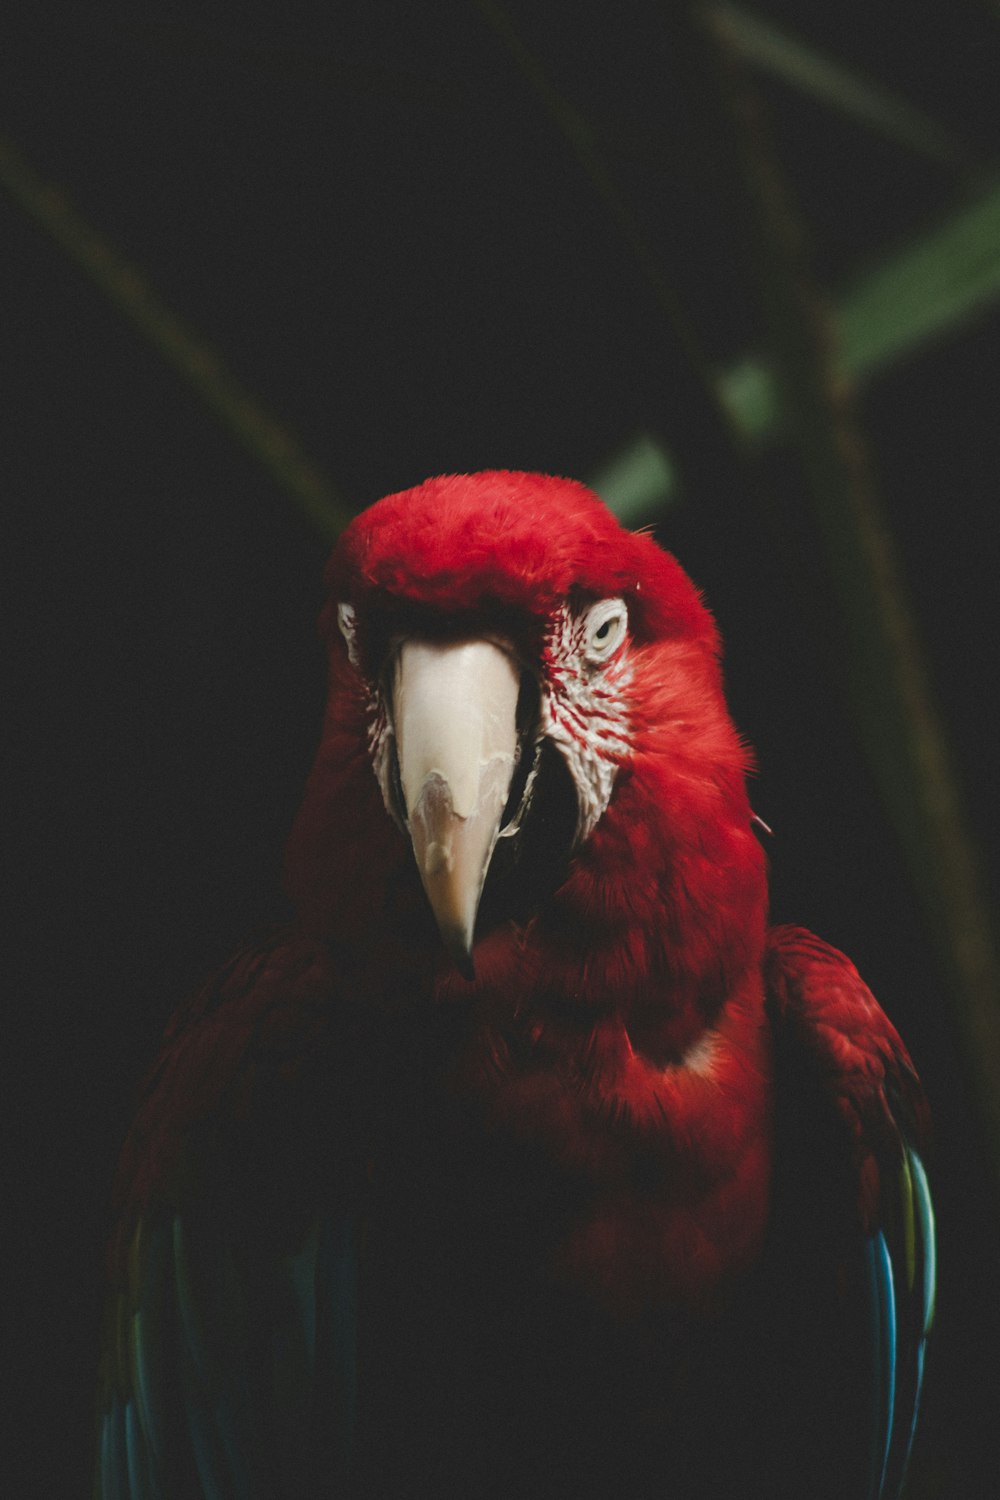 red and white bird in close up photography